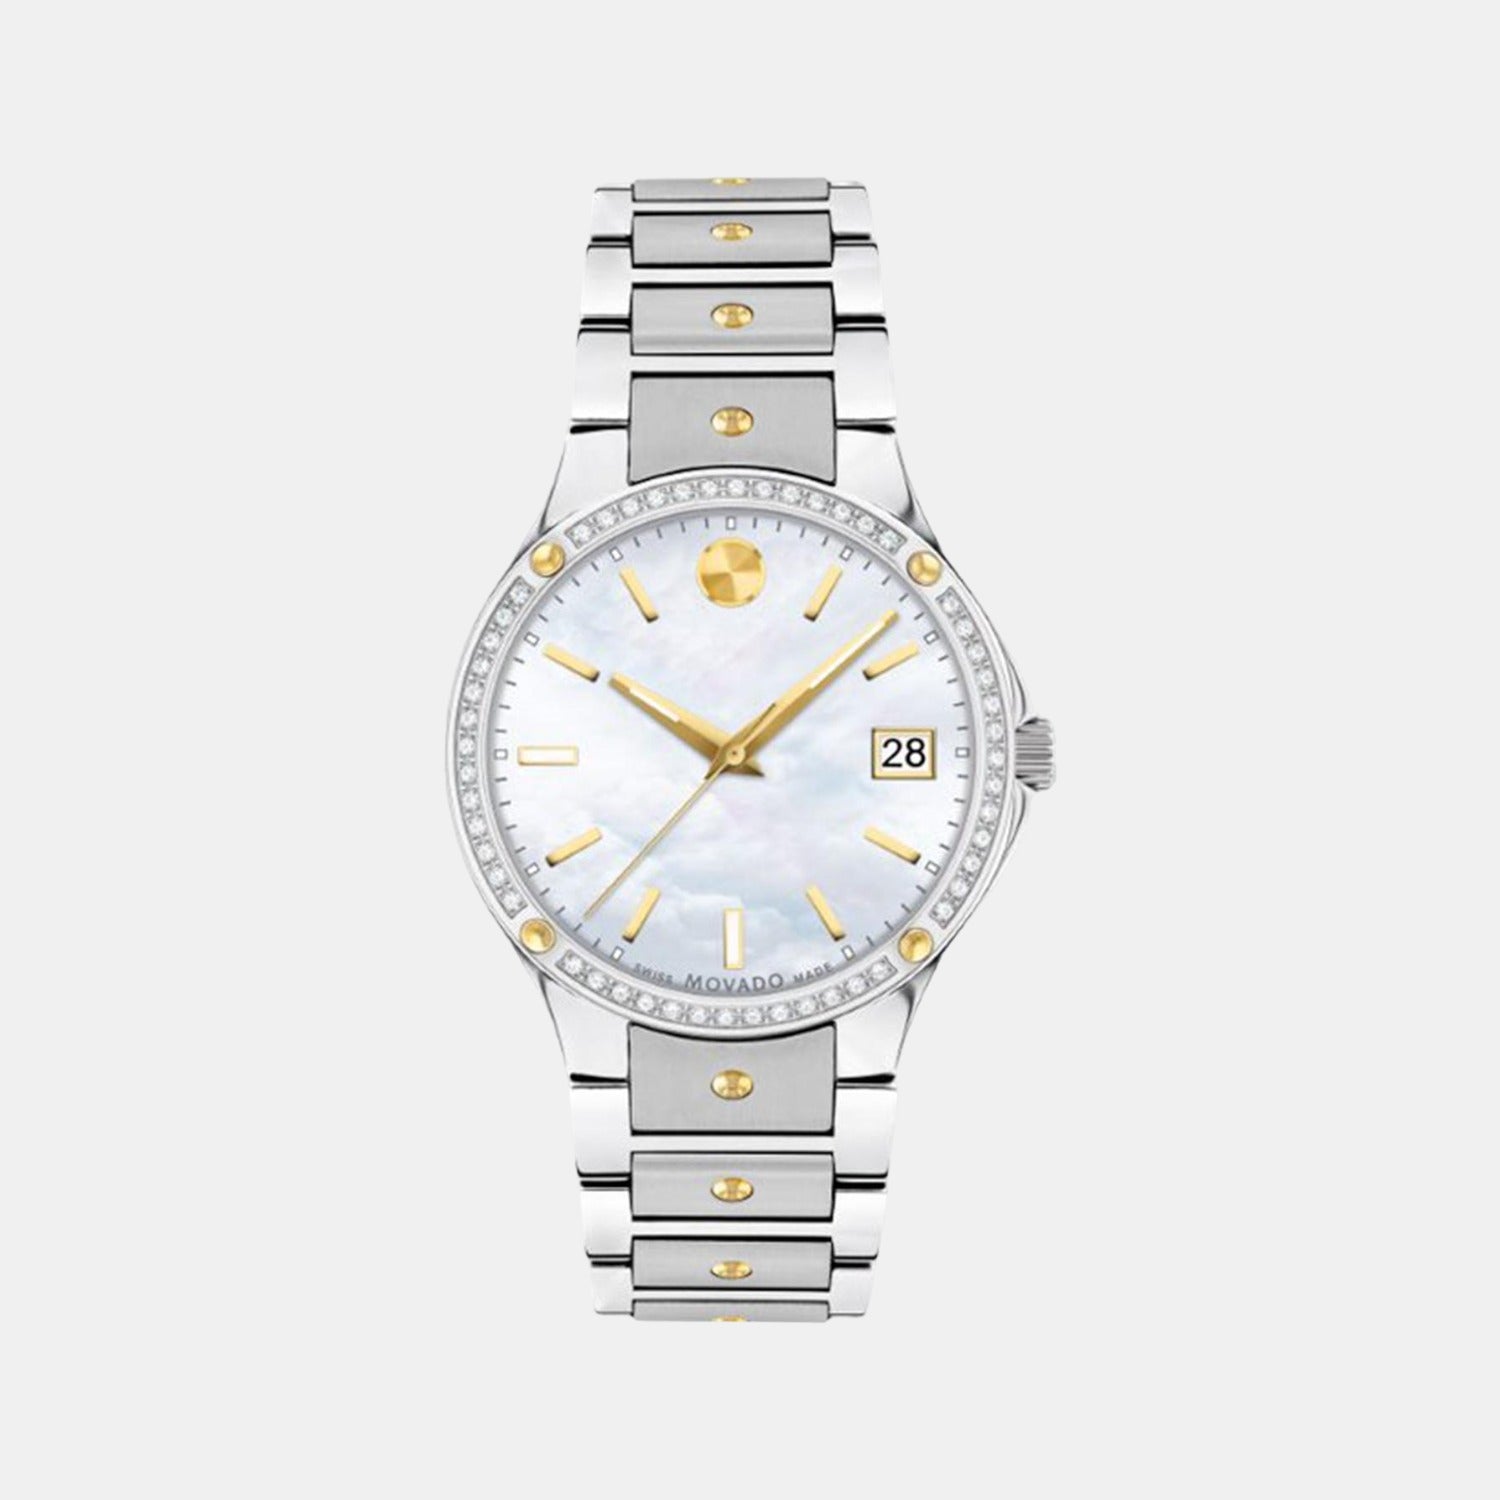 Female Analog Stainless Steel Watch 607517